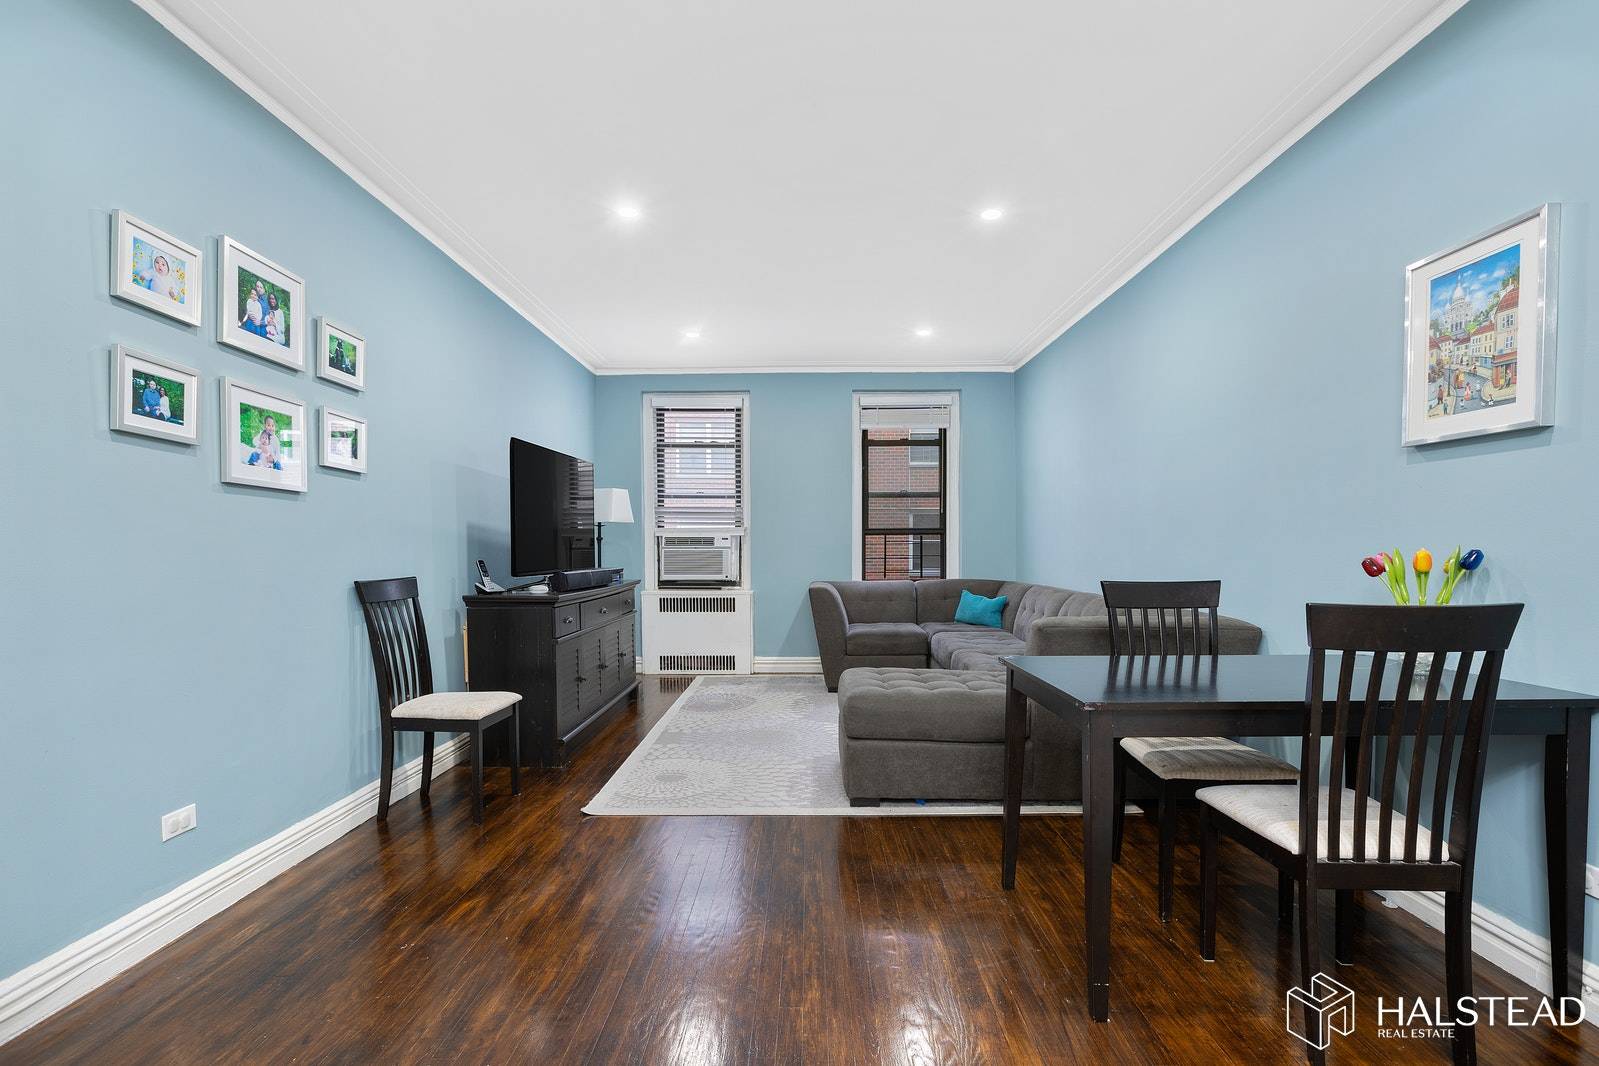 Welcome home to this Upper East Side 2 bedroom.